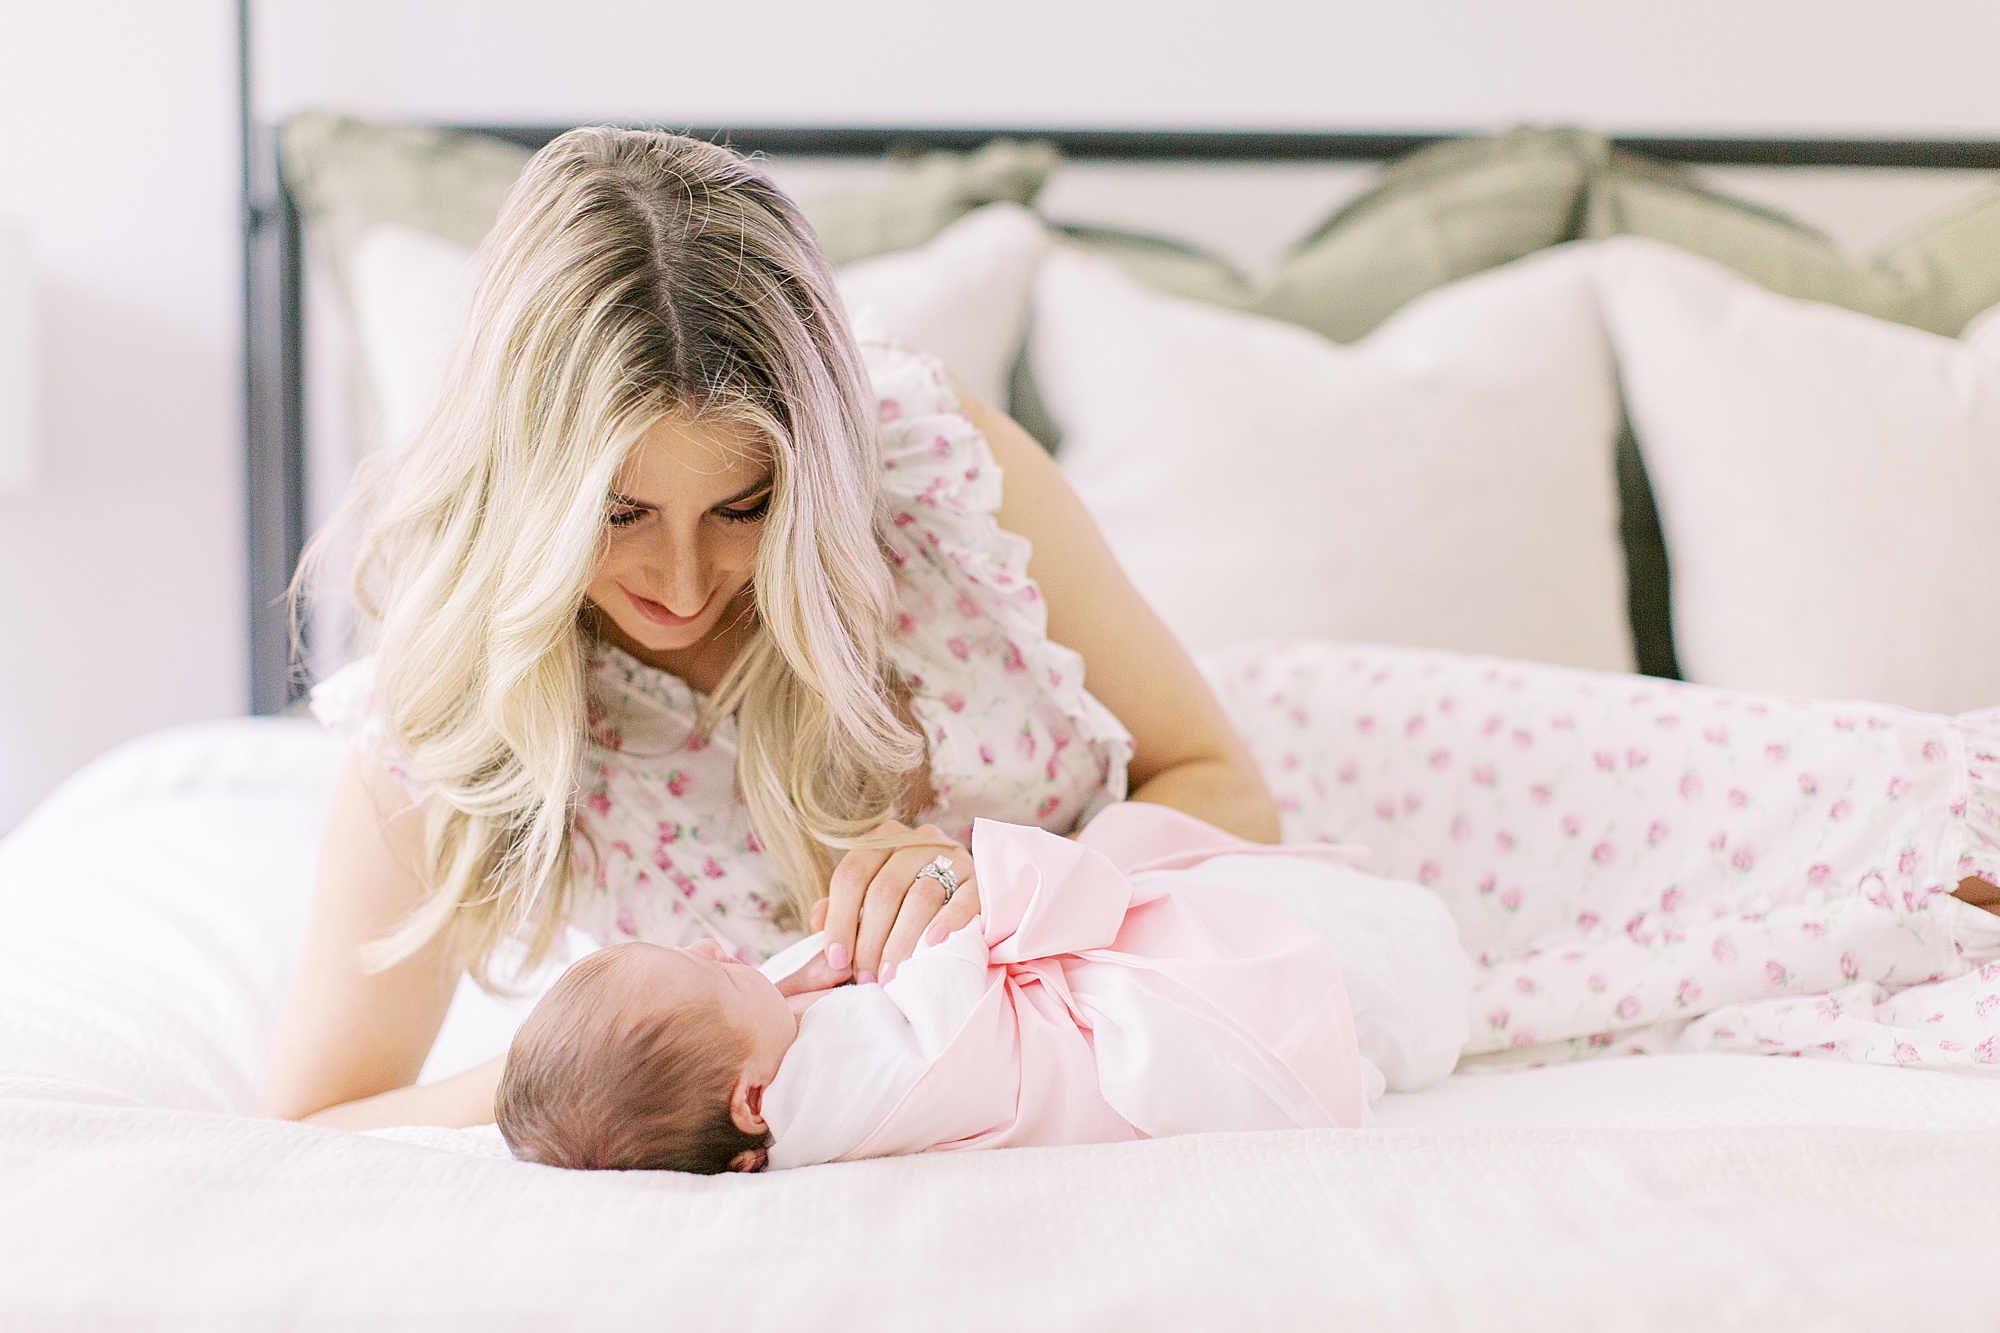 mom looks down at baby girl on bed during Charlotte NC newborn photos